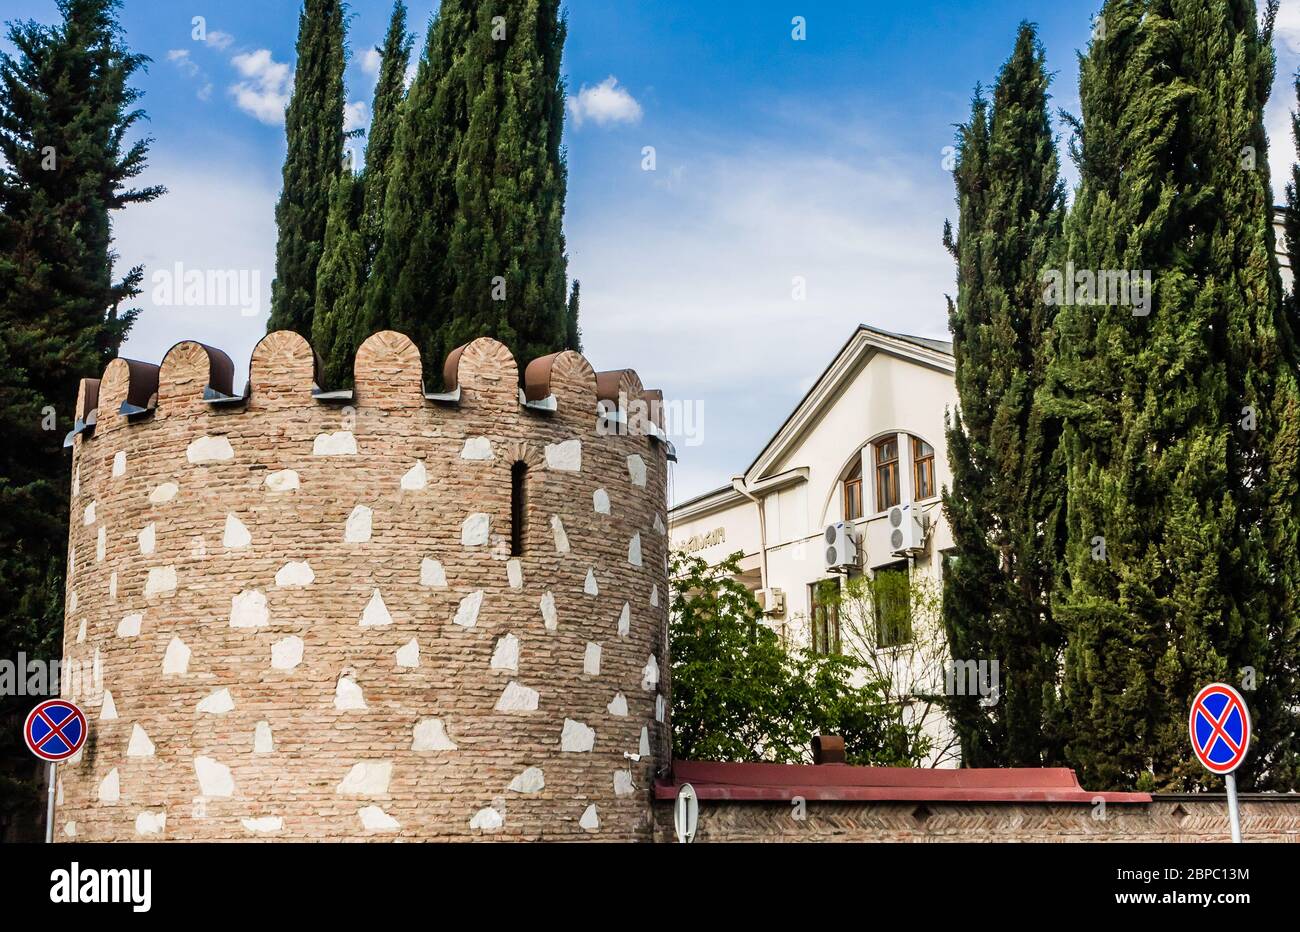 The massive ramparts with towers surround the building of Patriarchate of the Georgian Orthodox Church, located in Erekle II square in Tbilisi, Georgi Stock Photo